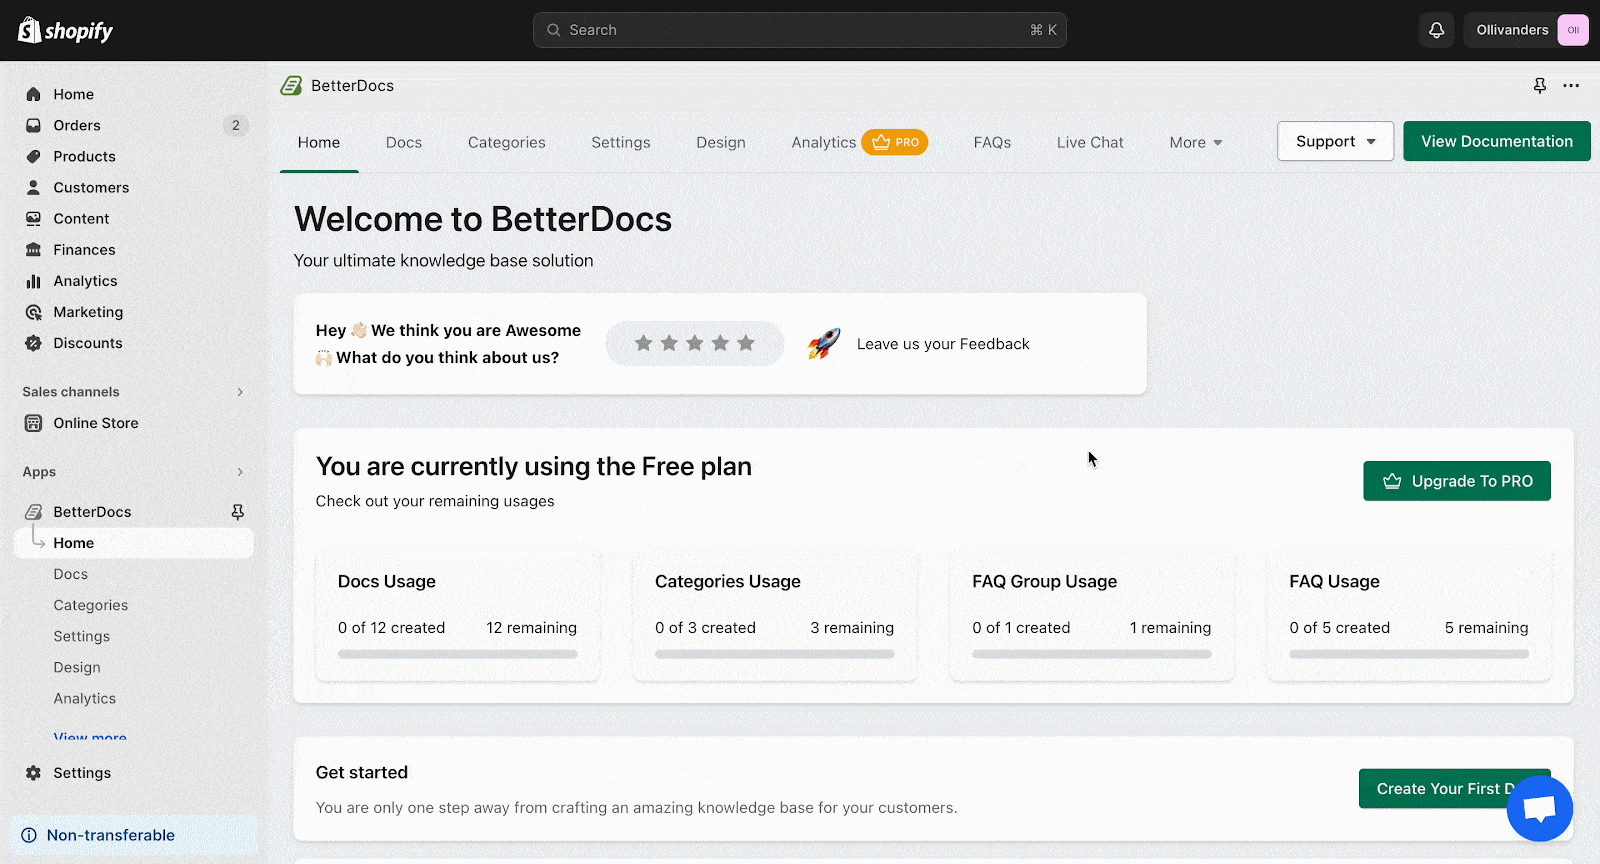 Live Chat In BetterDocs For Shopify?